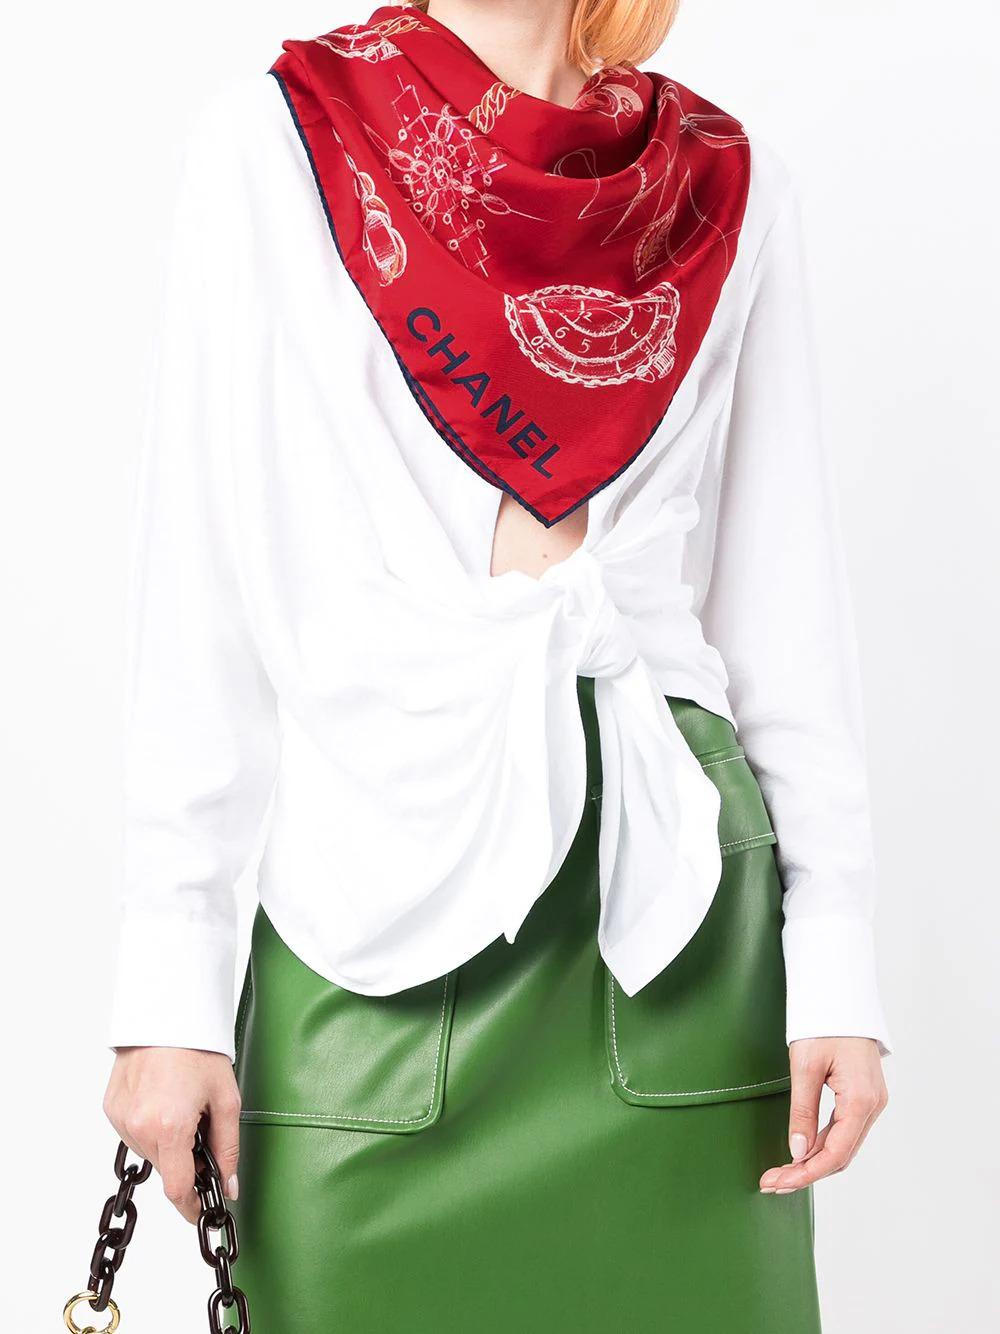 Inspired by all that is Chanel - the classic flap bag, Chanel no.5 perfume, statement cuffs, the camellia flower and the signature quilted pattern, this pre-owned 100% silk red scarf has been delicately bordered with a navy pipe trim. The chicest